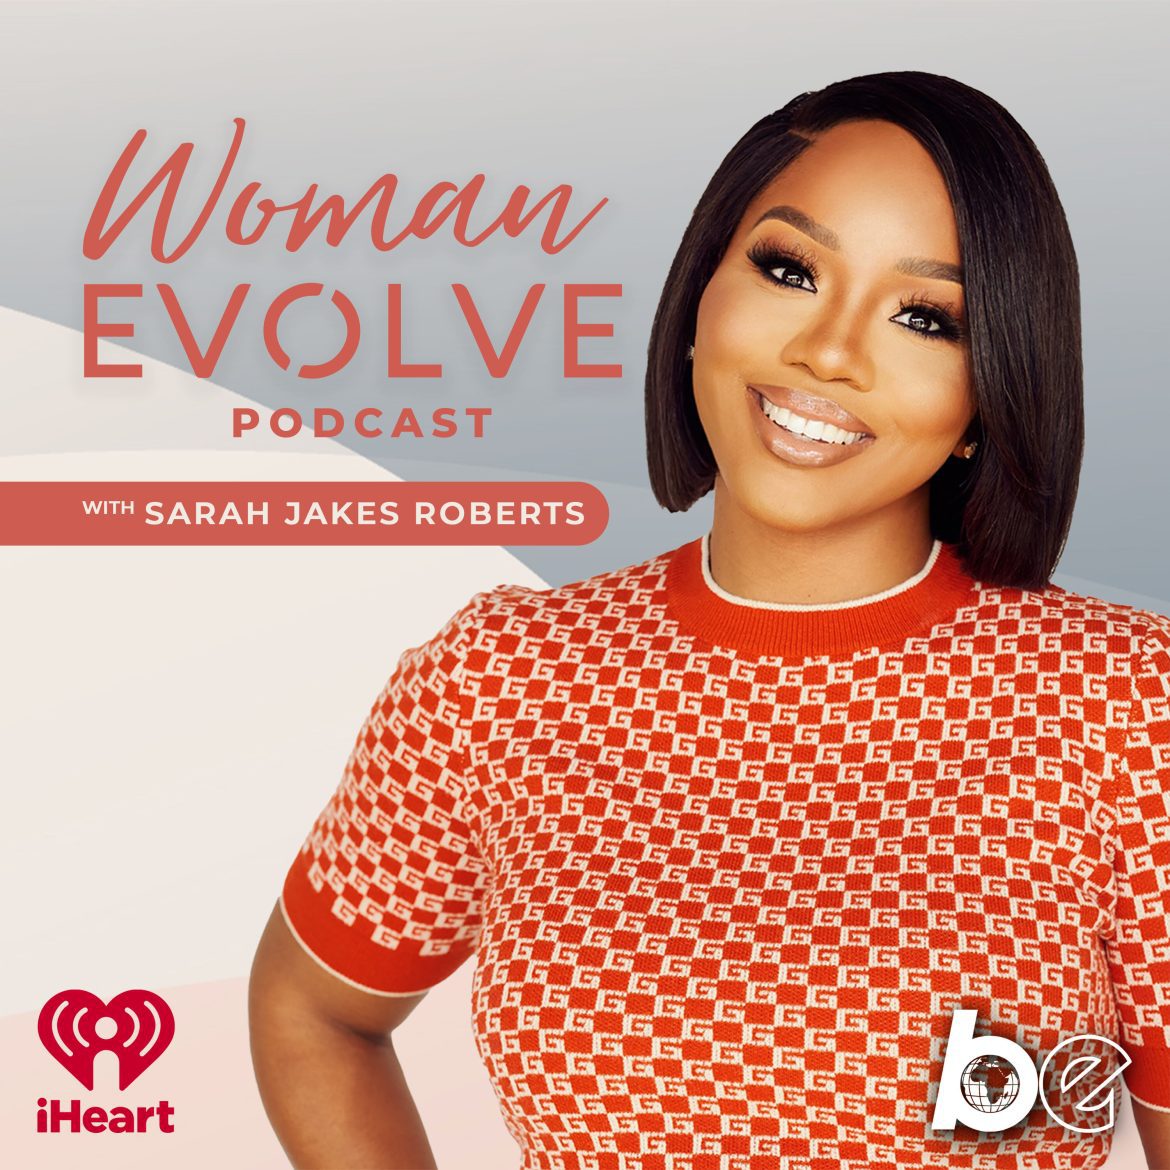 Black Podcasting - The Power to Start Over w/ Adrienne Bailon-Houghton